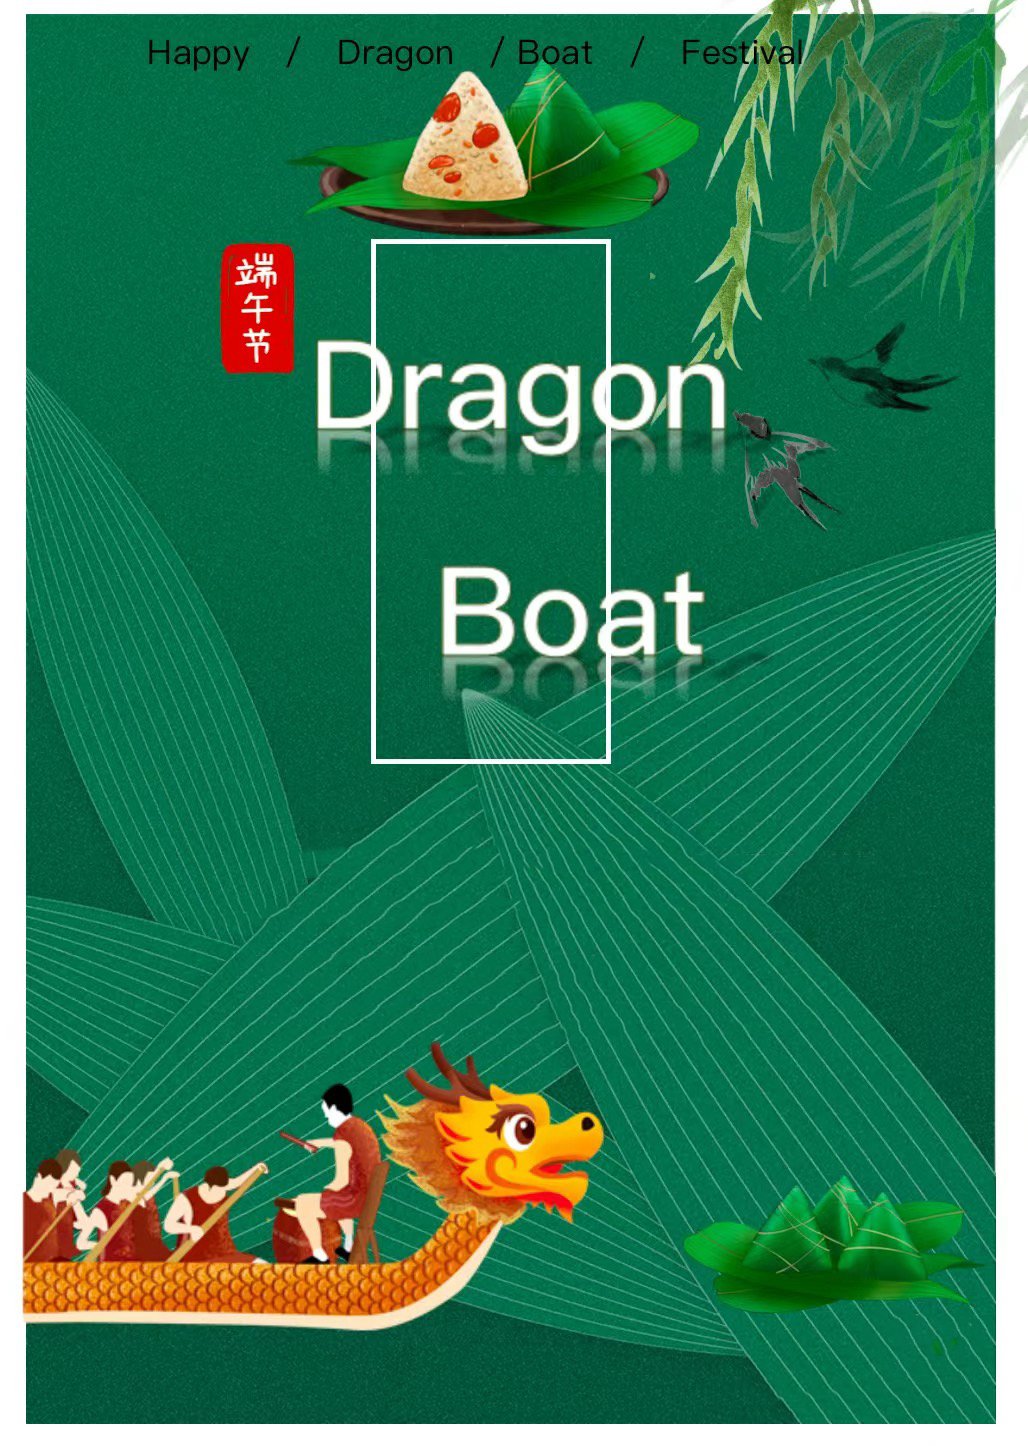 Notice of Dragon Boat Festival Holiday